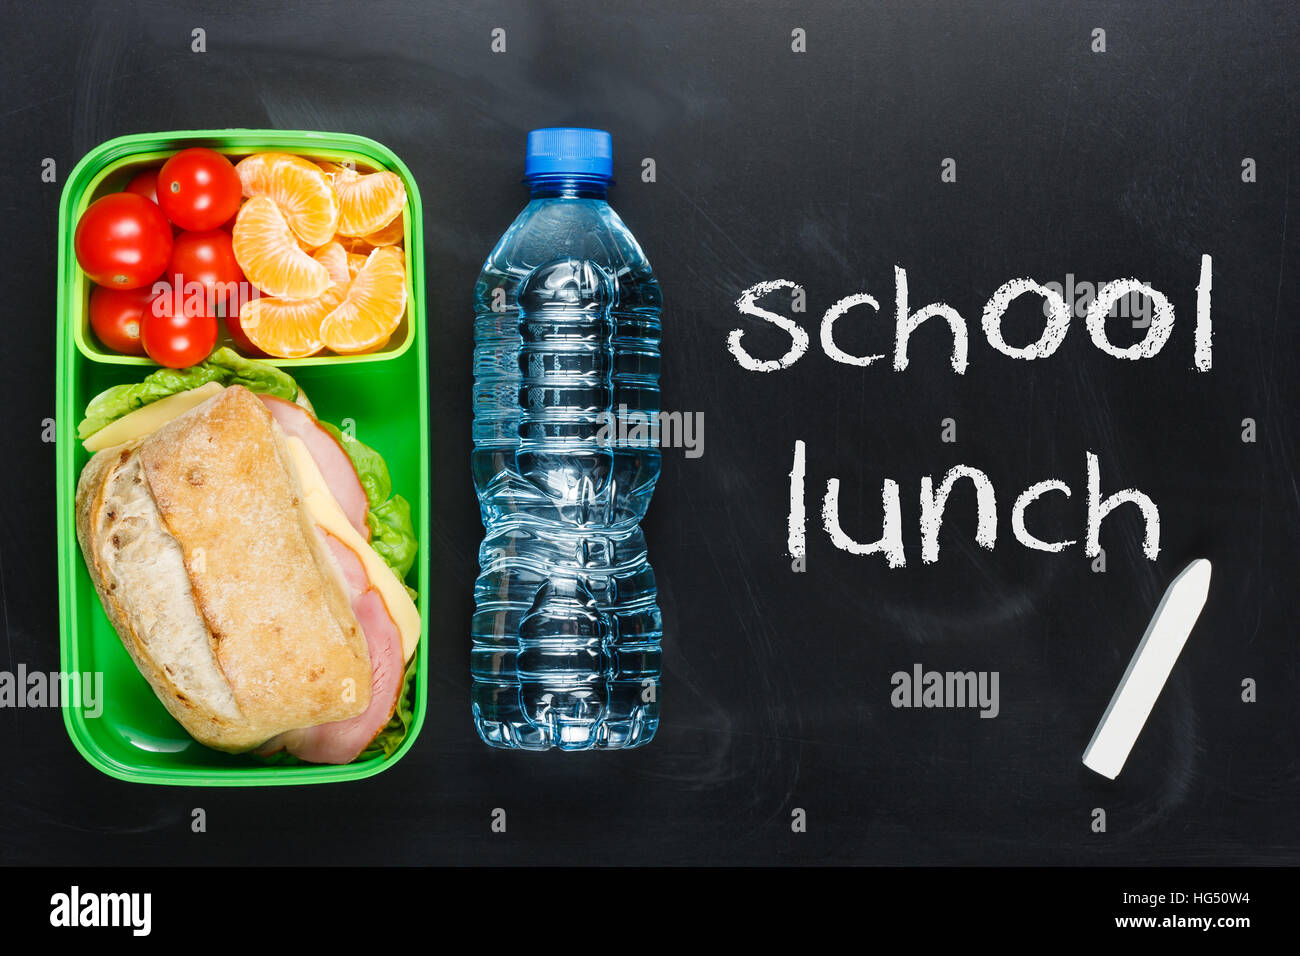 Sandwich, small tomatoes, tangerine in plastic lunch box and bottle of water on black chalkboard. Stock Photo